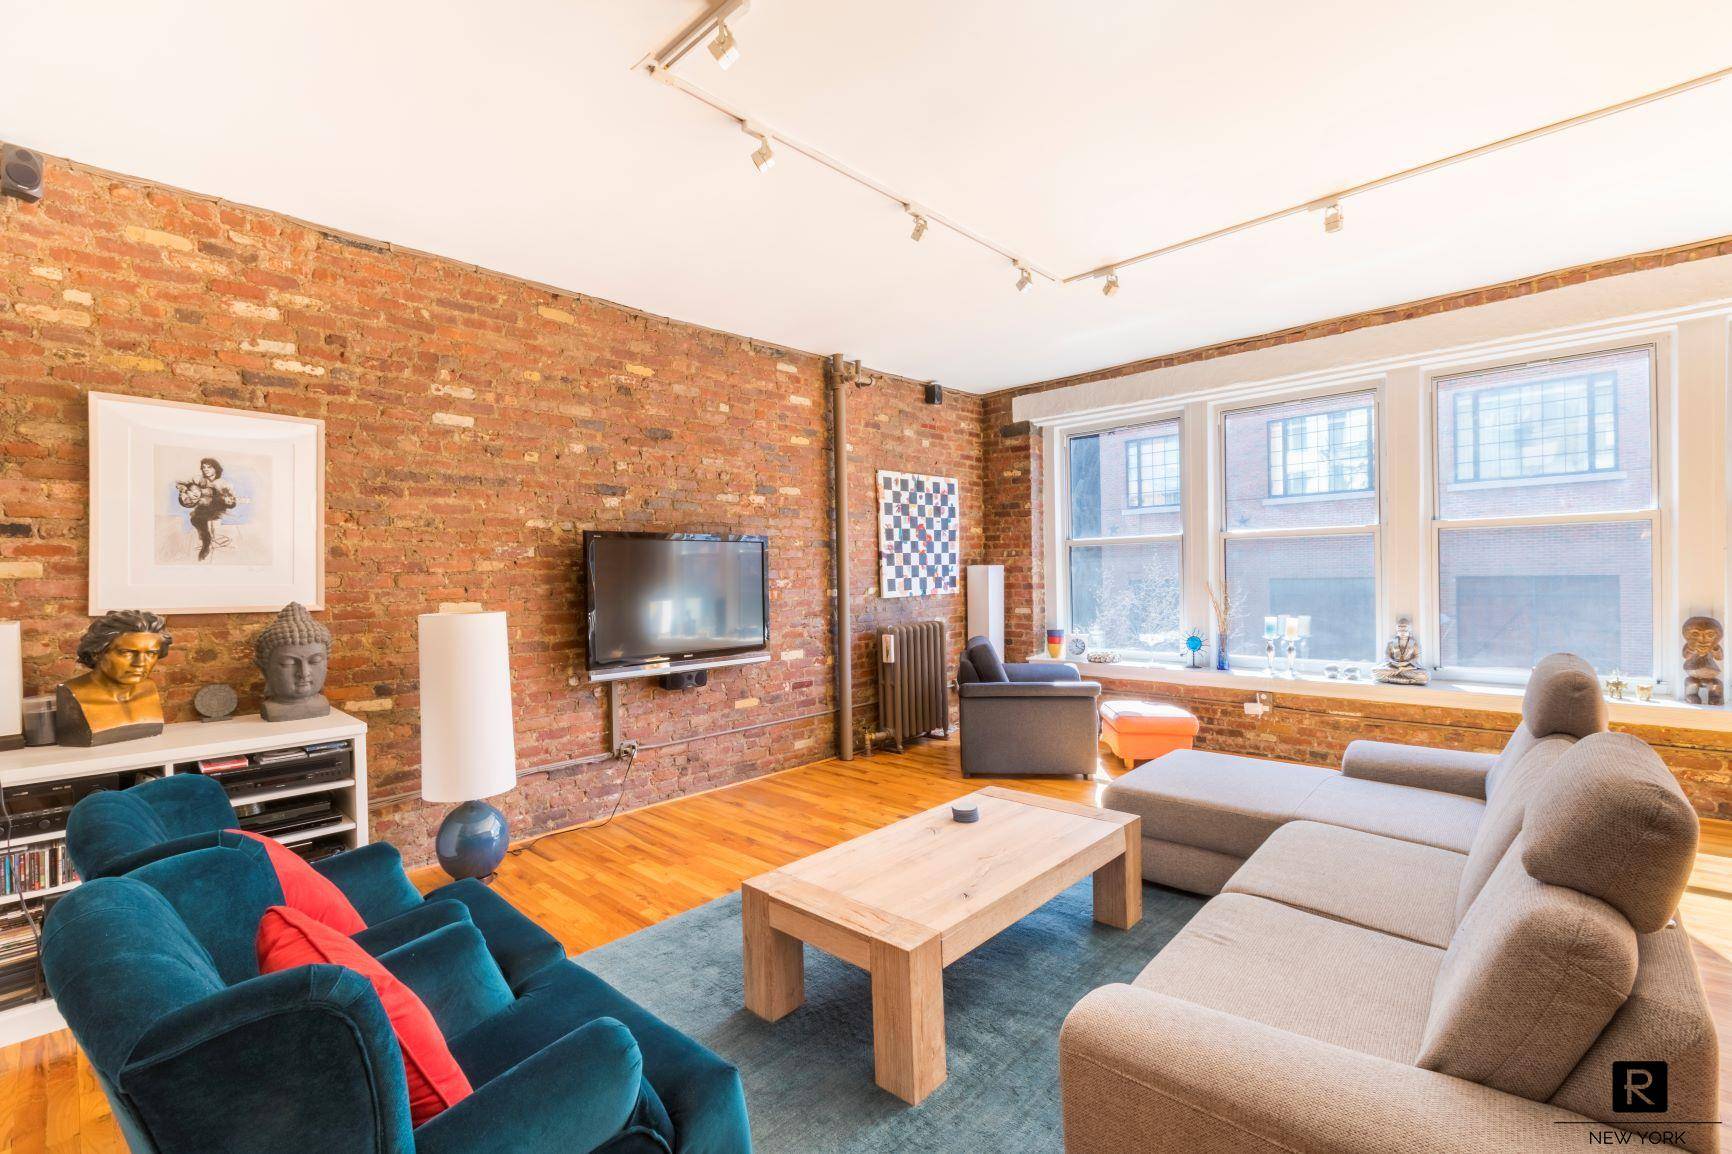 FURNISHED SHORT TERM RENTAL ON THE BOWERY !